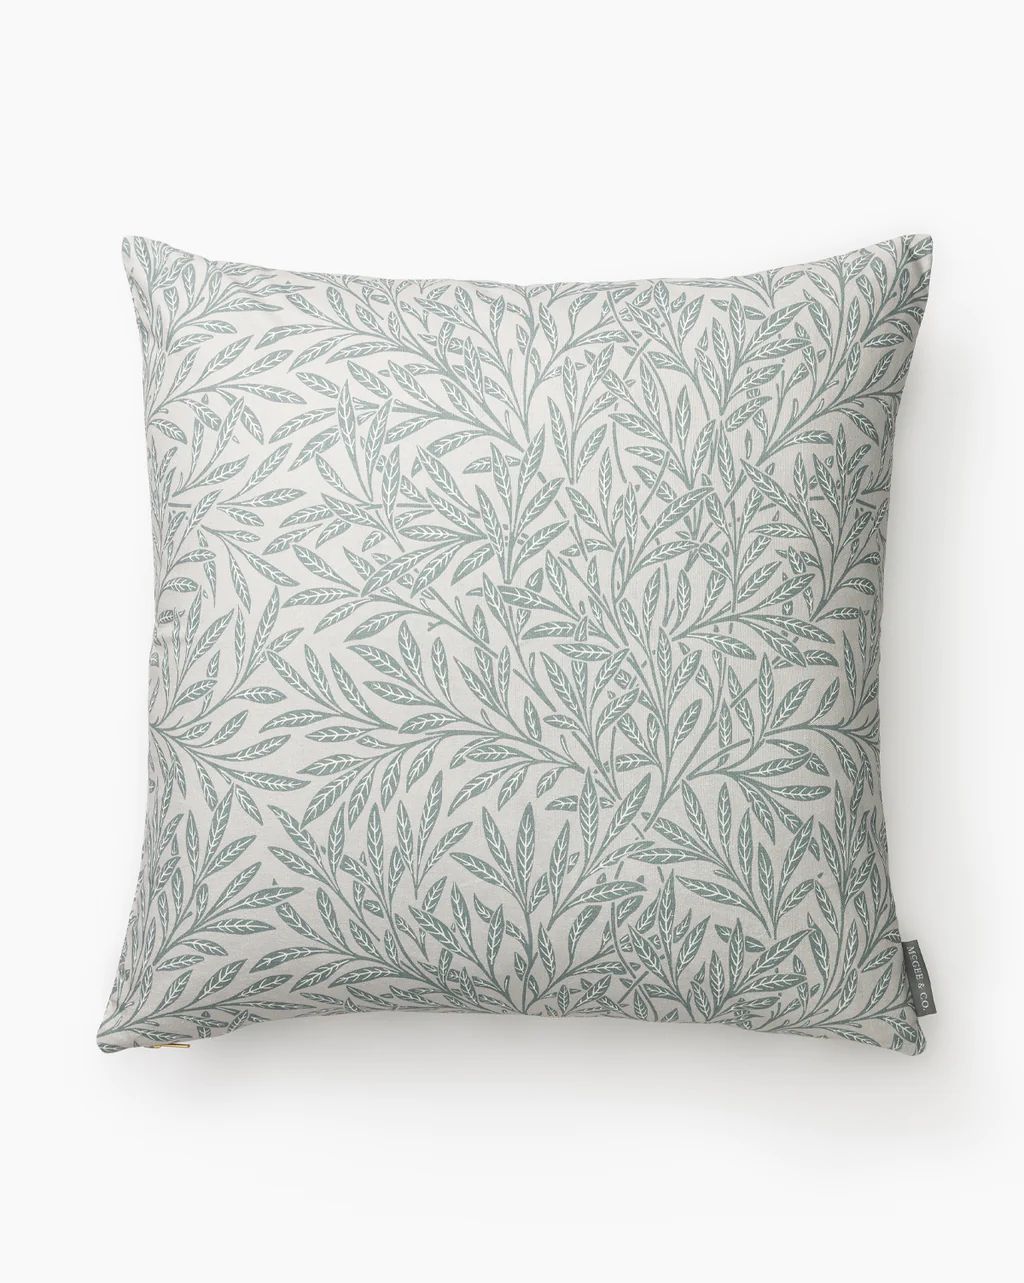 Morris & Co. x McGee & Co. Willow Pillow Cover | McGee & Co.